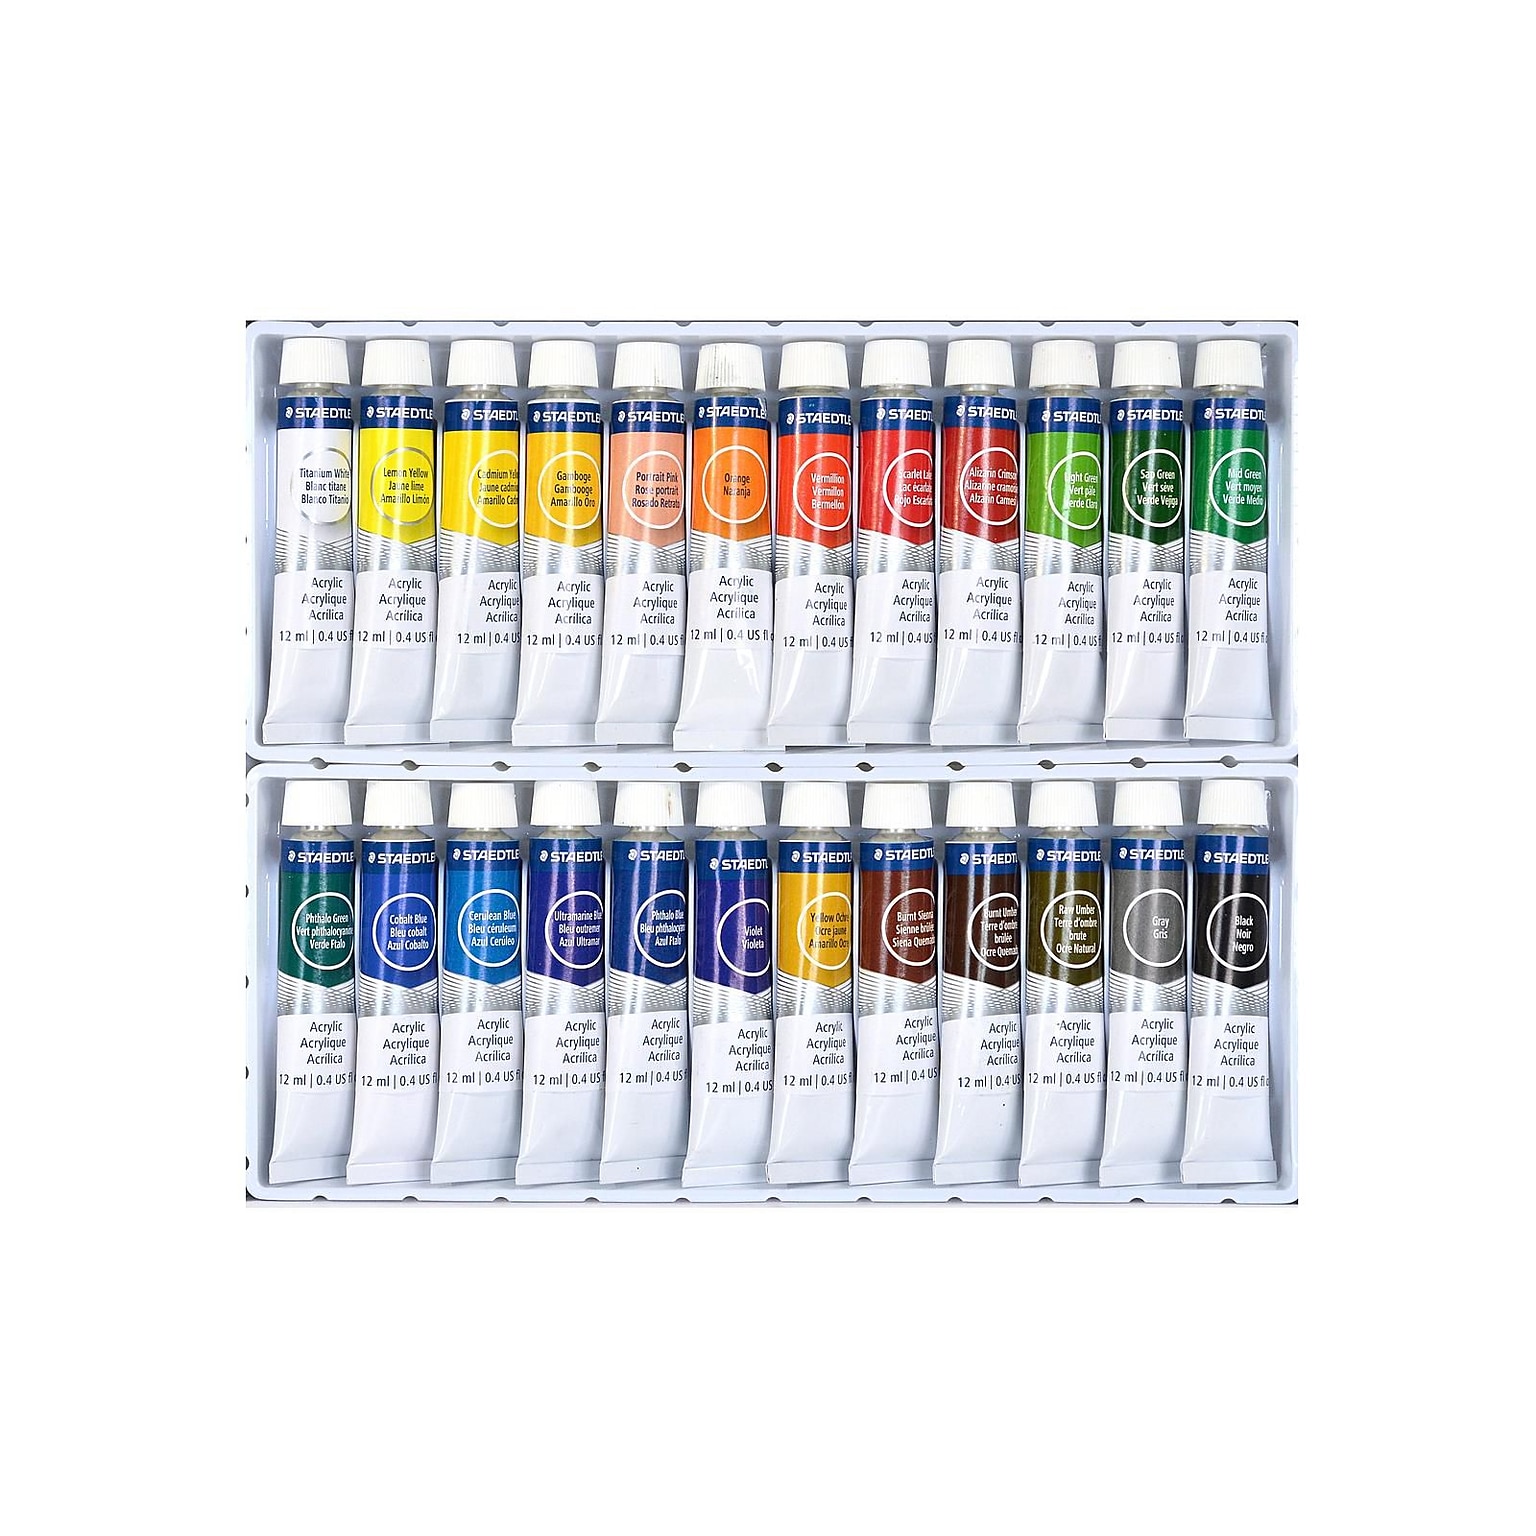 Staedtler Acrylic Paints, Assorted Colors, Set Of 24 (8500 C24A6)